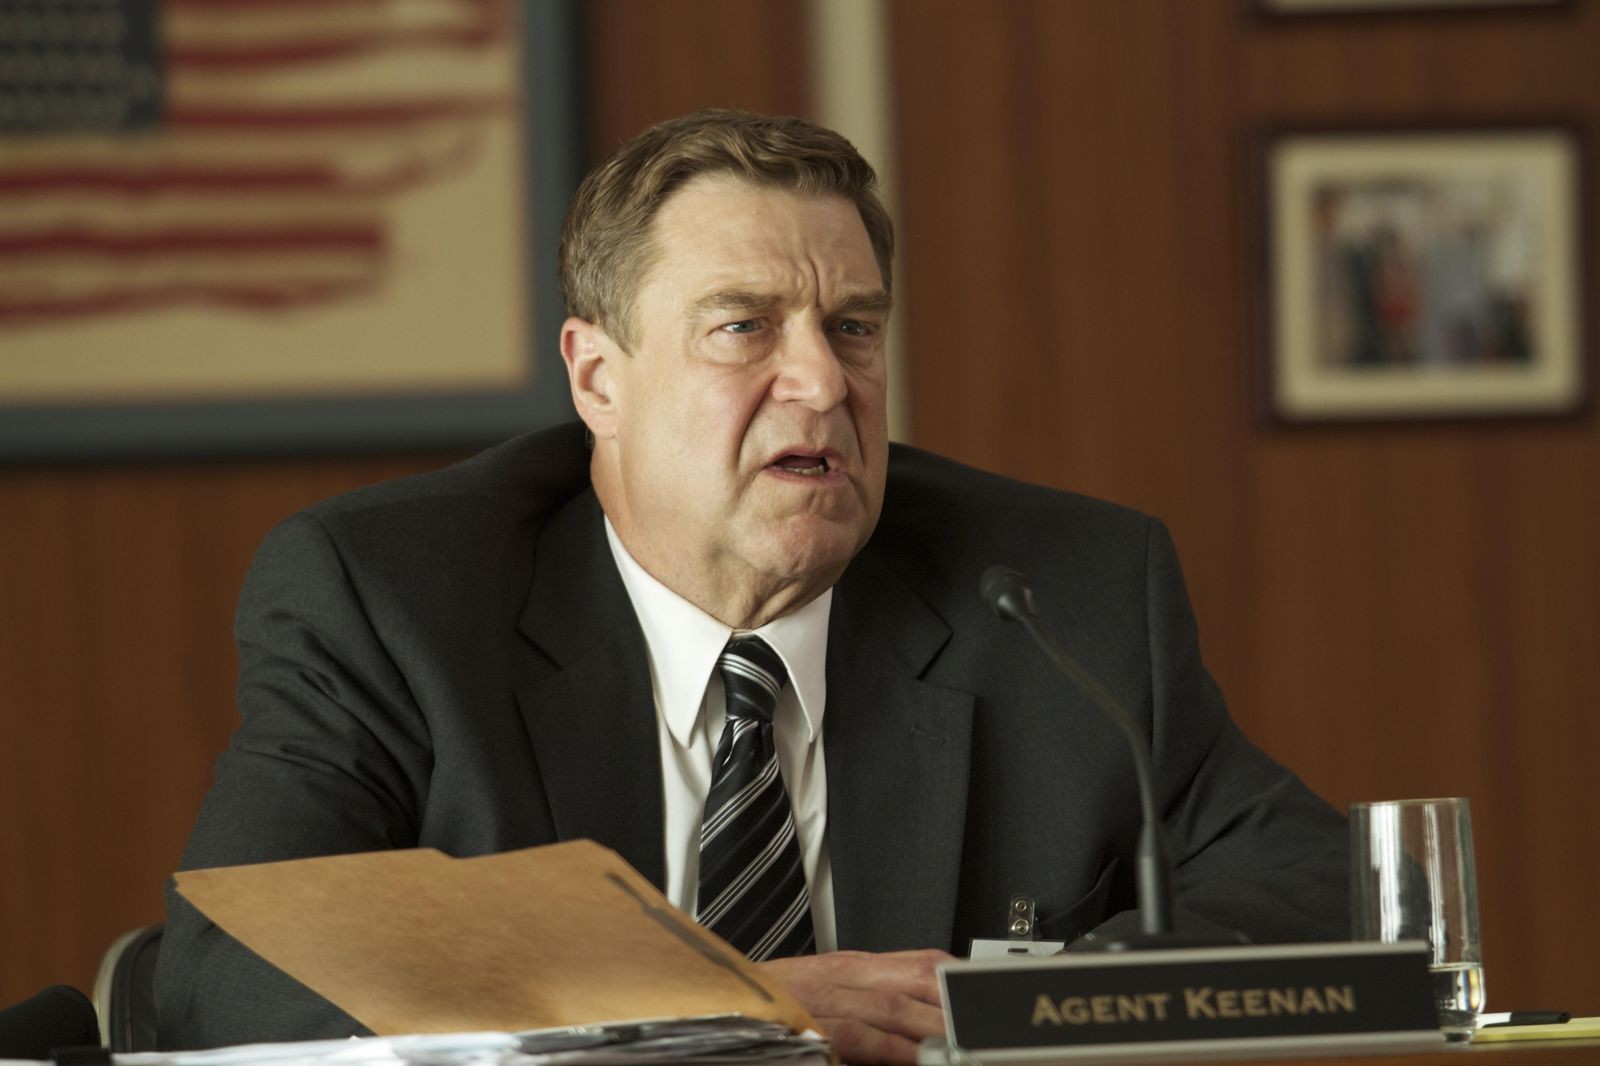 John Goodman stars as Joseph Keenan in Smodcast Pictures' Red State (2011)